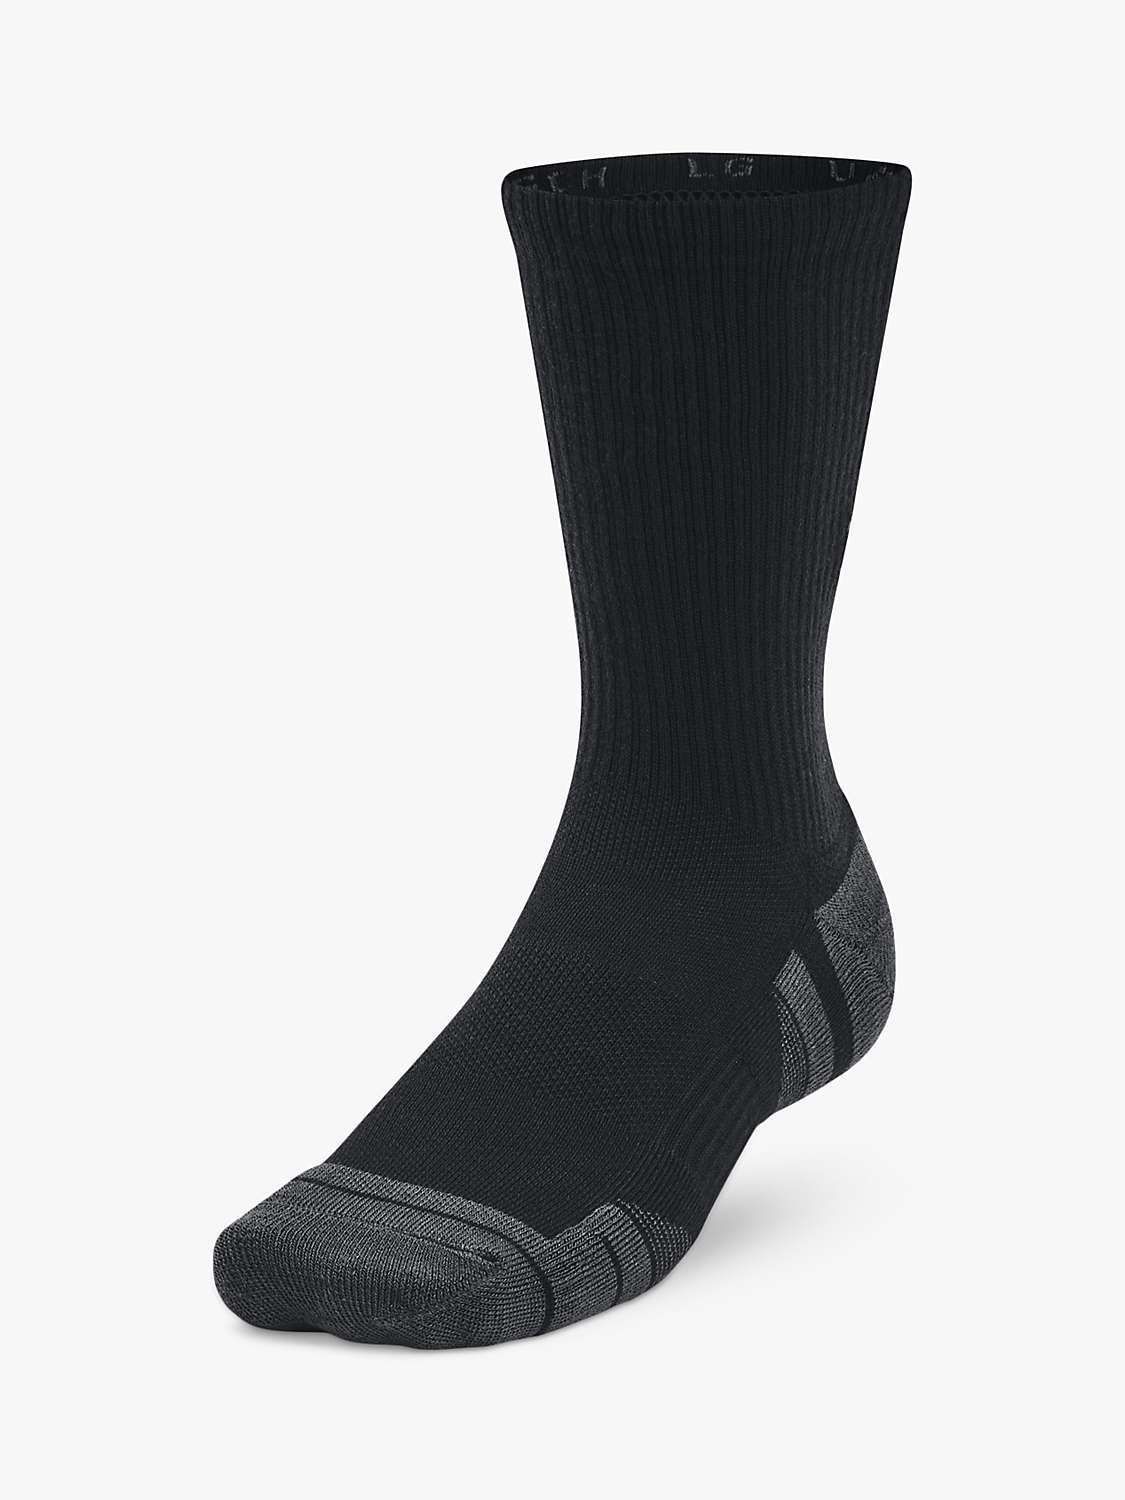 Buy Under Armour Performance Tech Crew Socks, Pack of 3, Blacka/Jet Gray Online at johnlewis.com